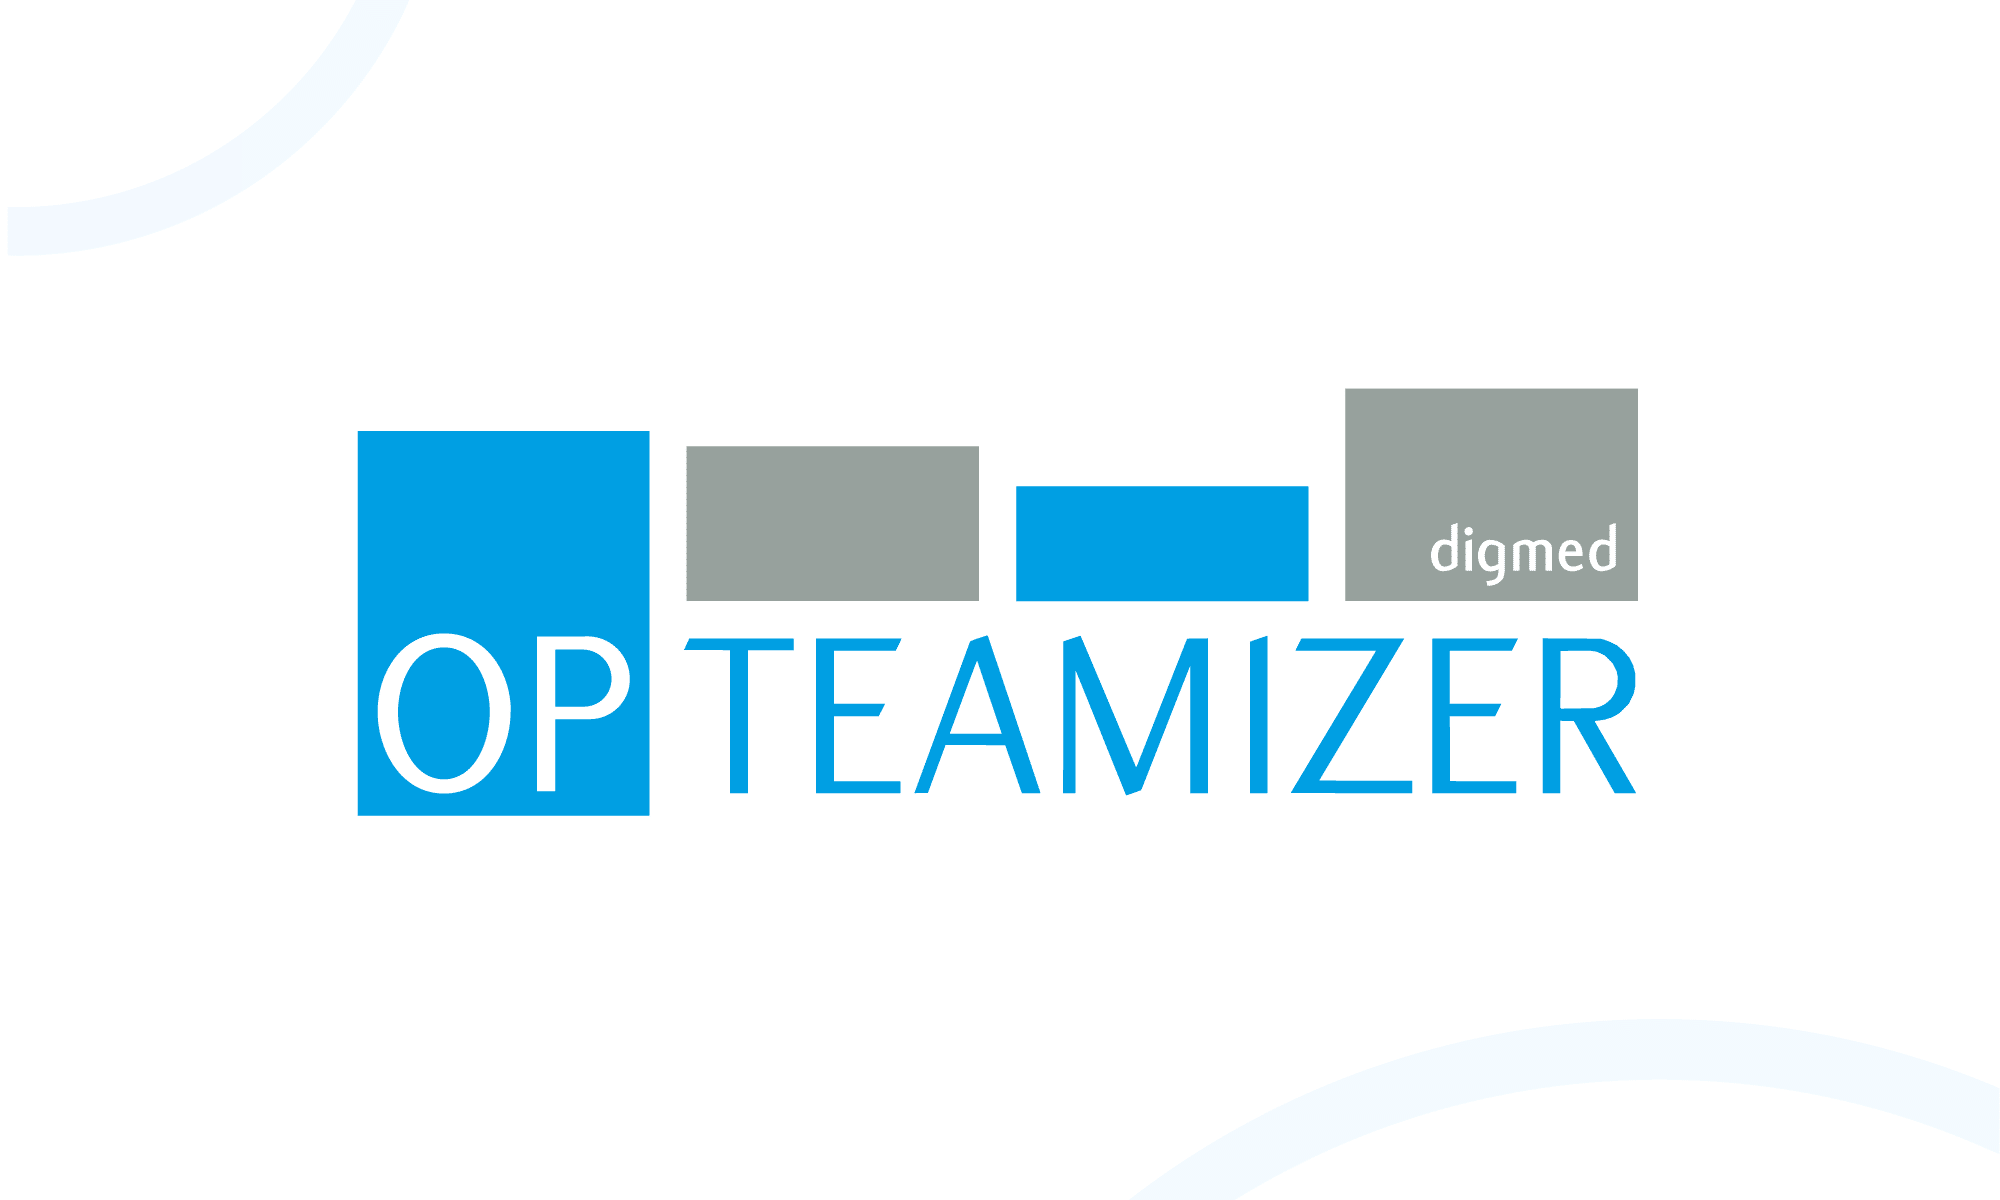 OPTEAMIZER